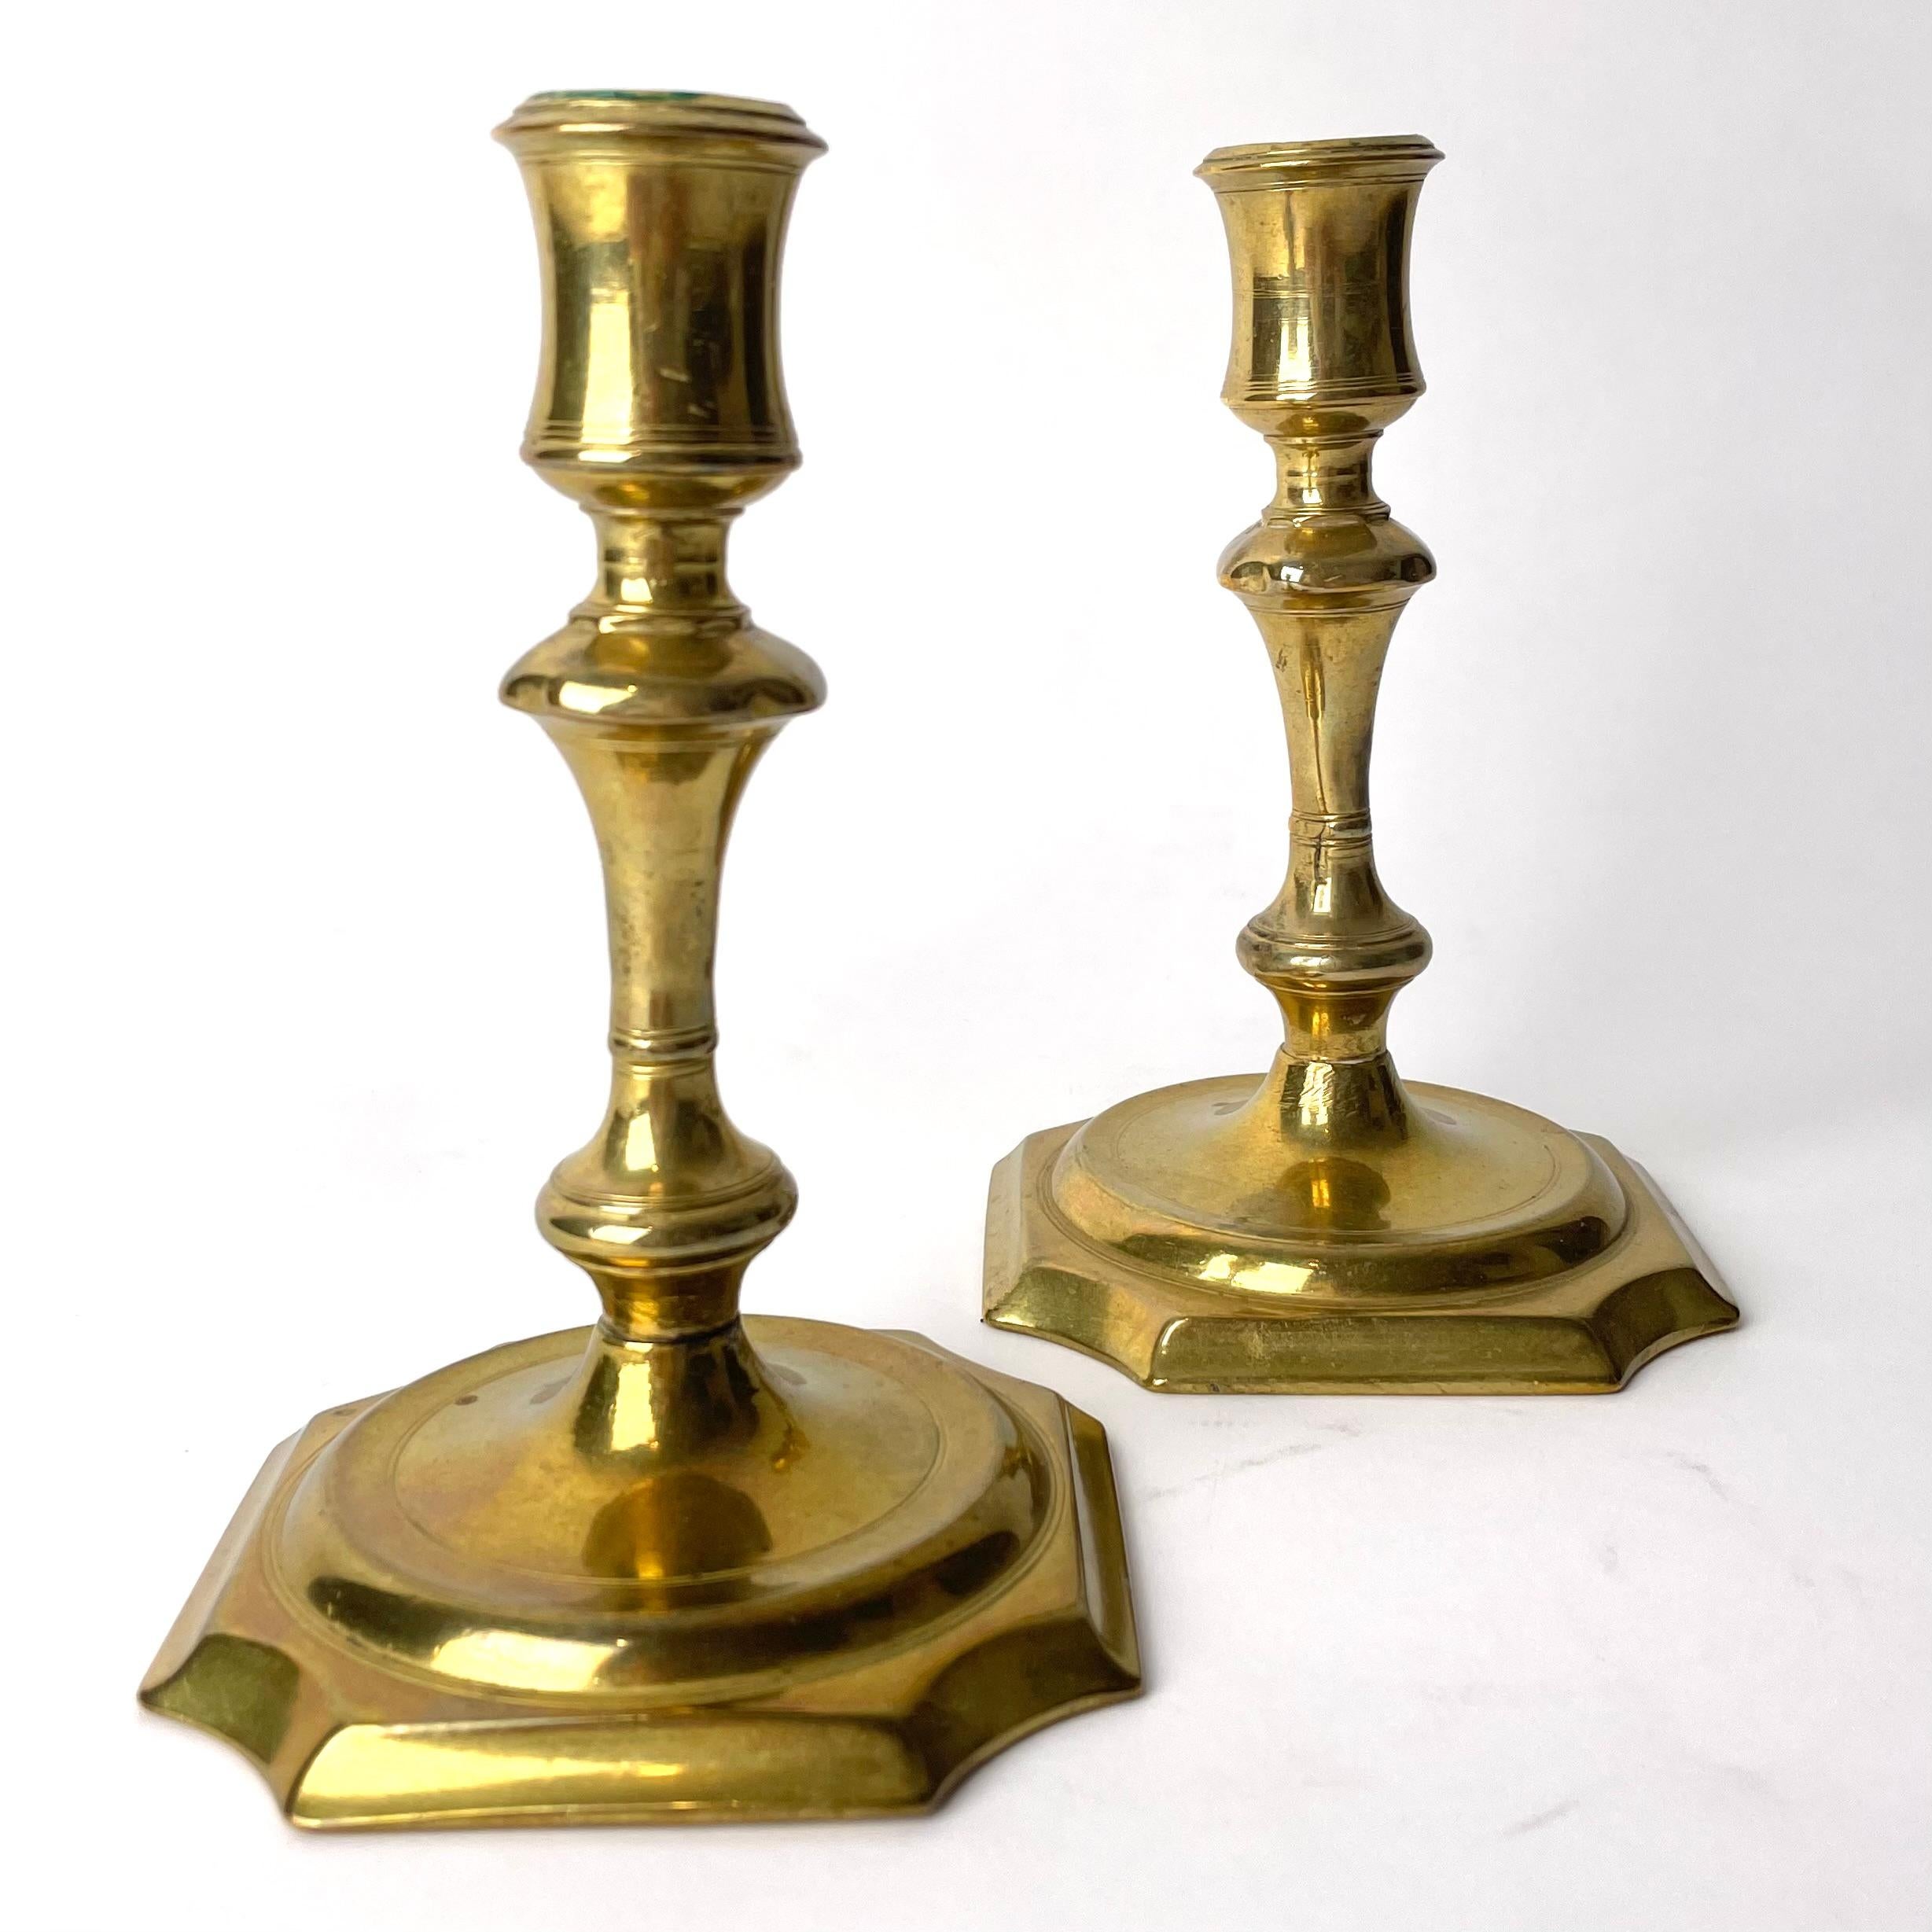 A Pair of 2 Lovely Brass Candlesticks, Late Baroque, Early 18th Century

A charming pair of Late Baroque Candlesticks in a beautifully rich brass. Typical Late Baroque ornamentation with heavy focus on form, letting the materials shine in